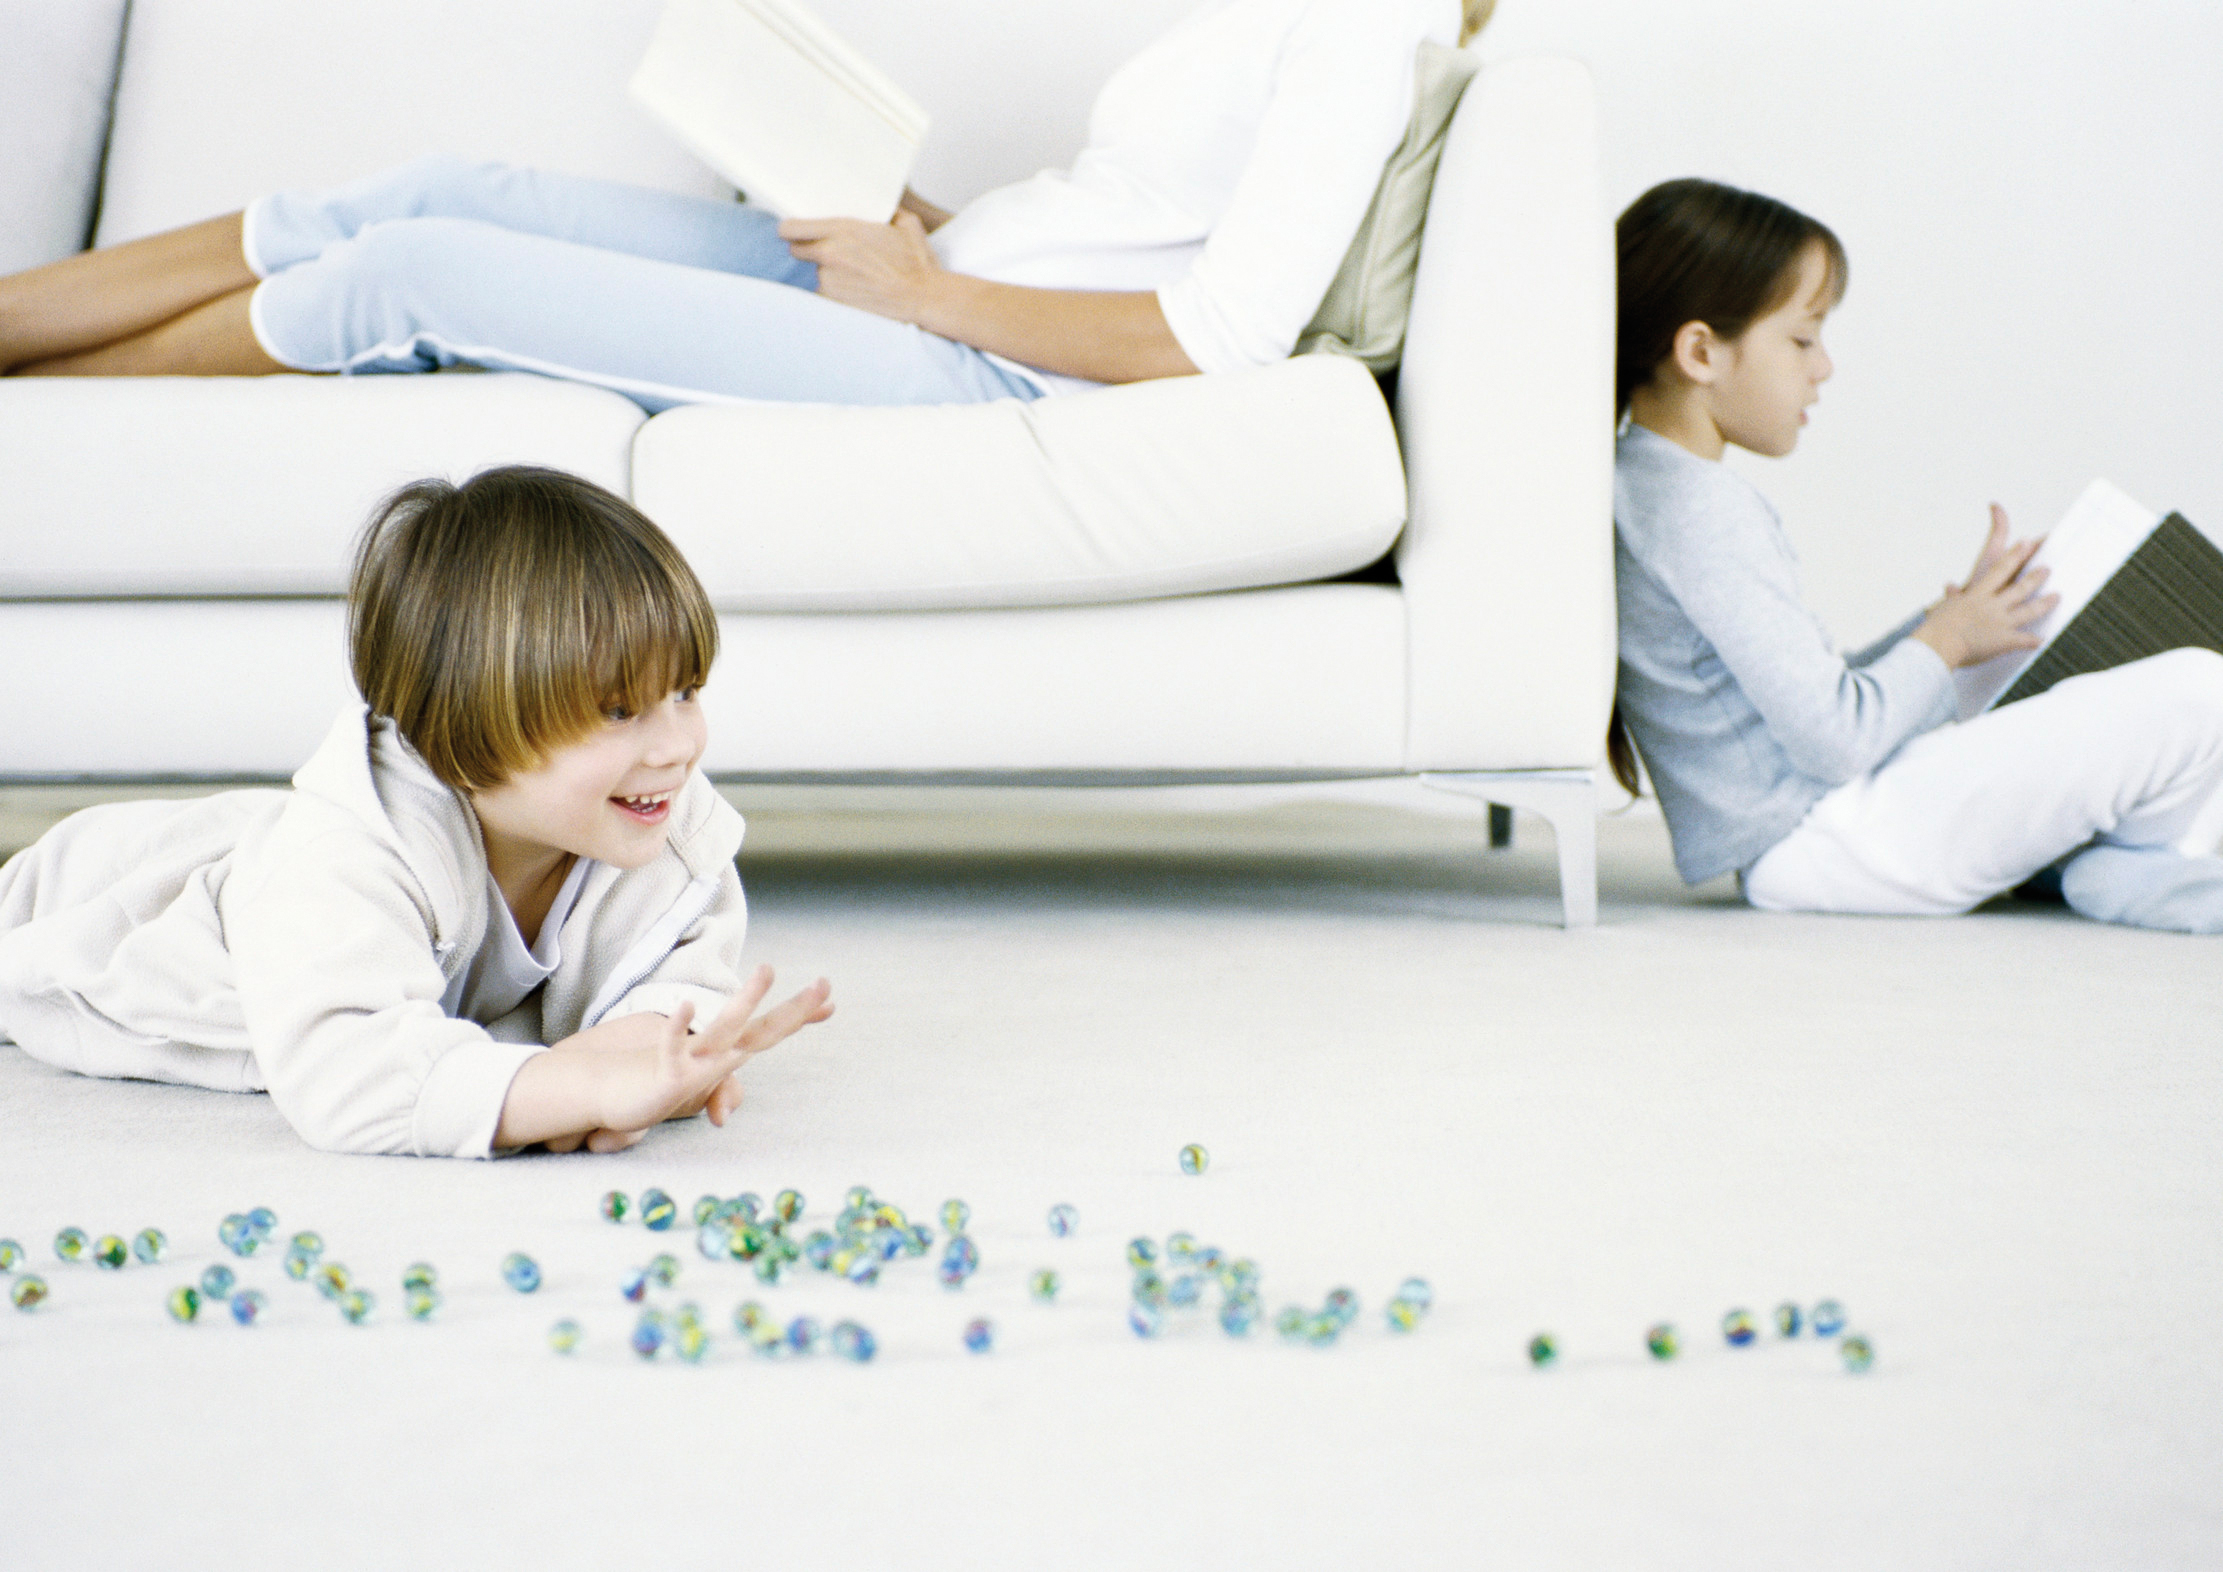 Underfloor heating: The Right Choice for Your Heating System